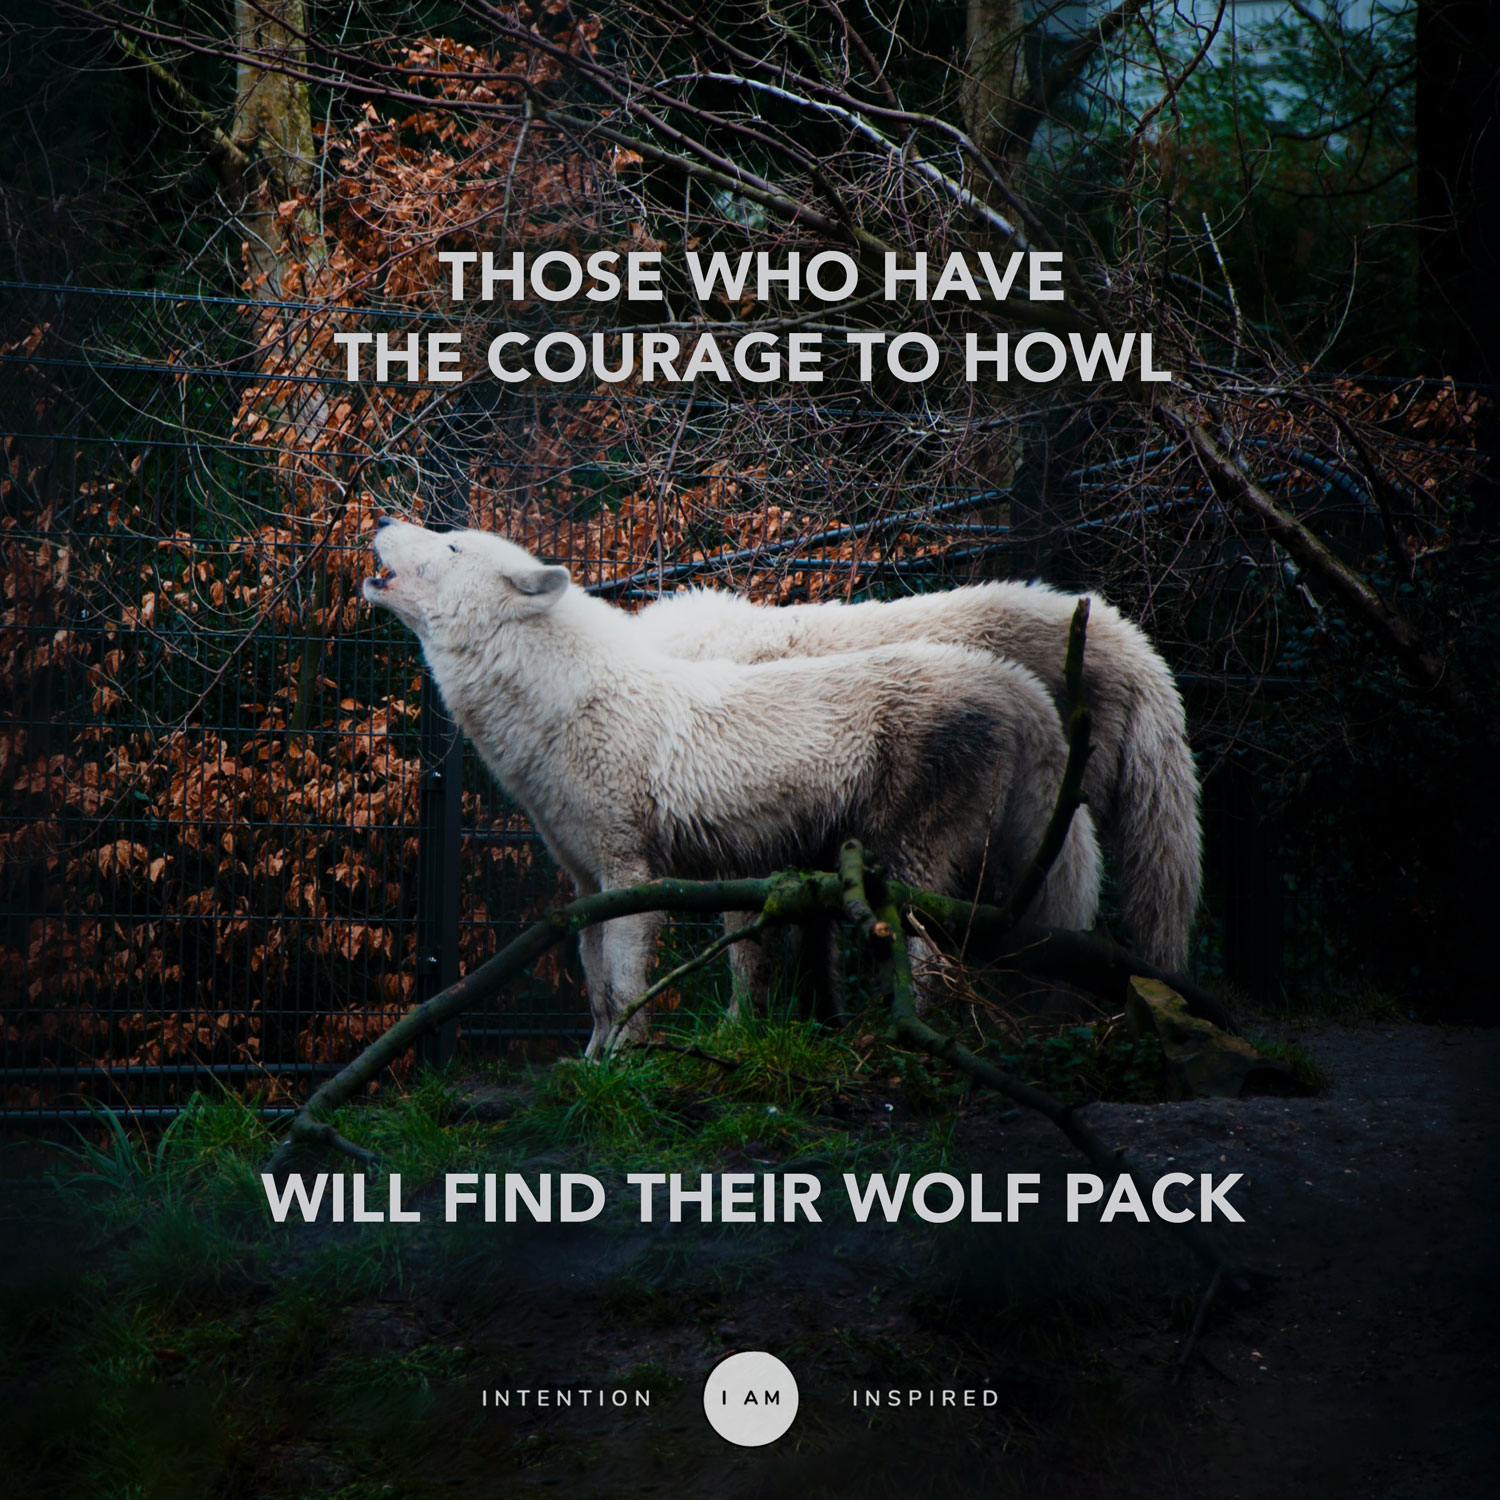 Those who have the courage to howl will find their wolf pack.